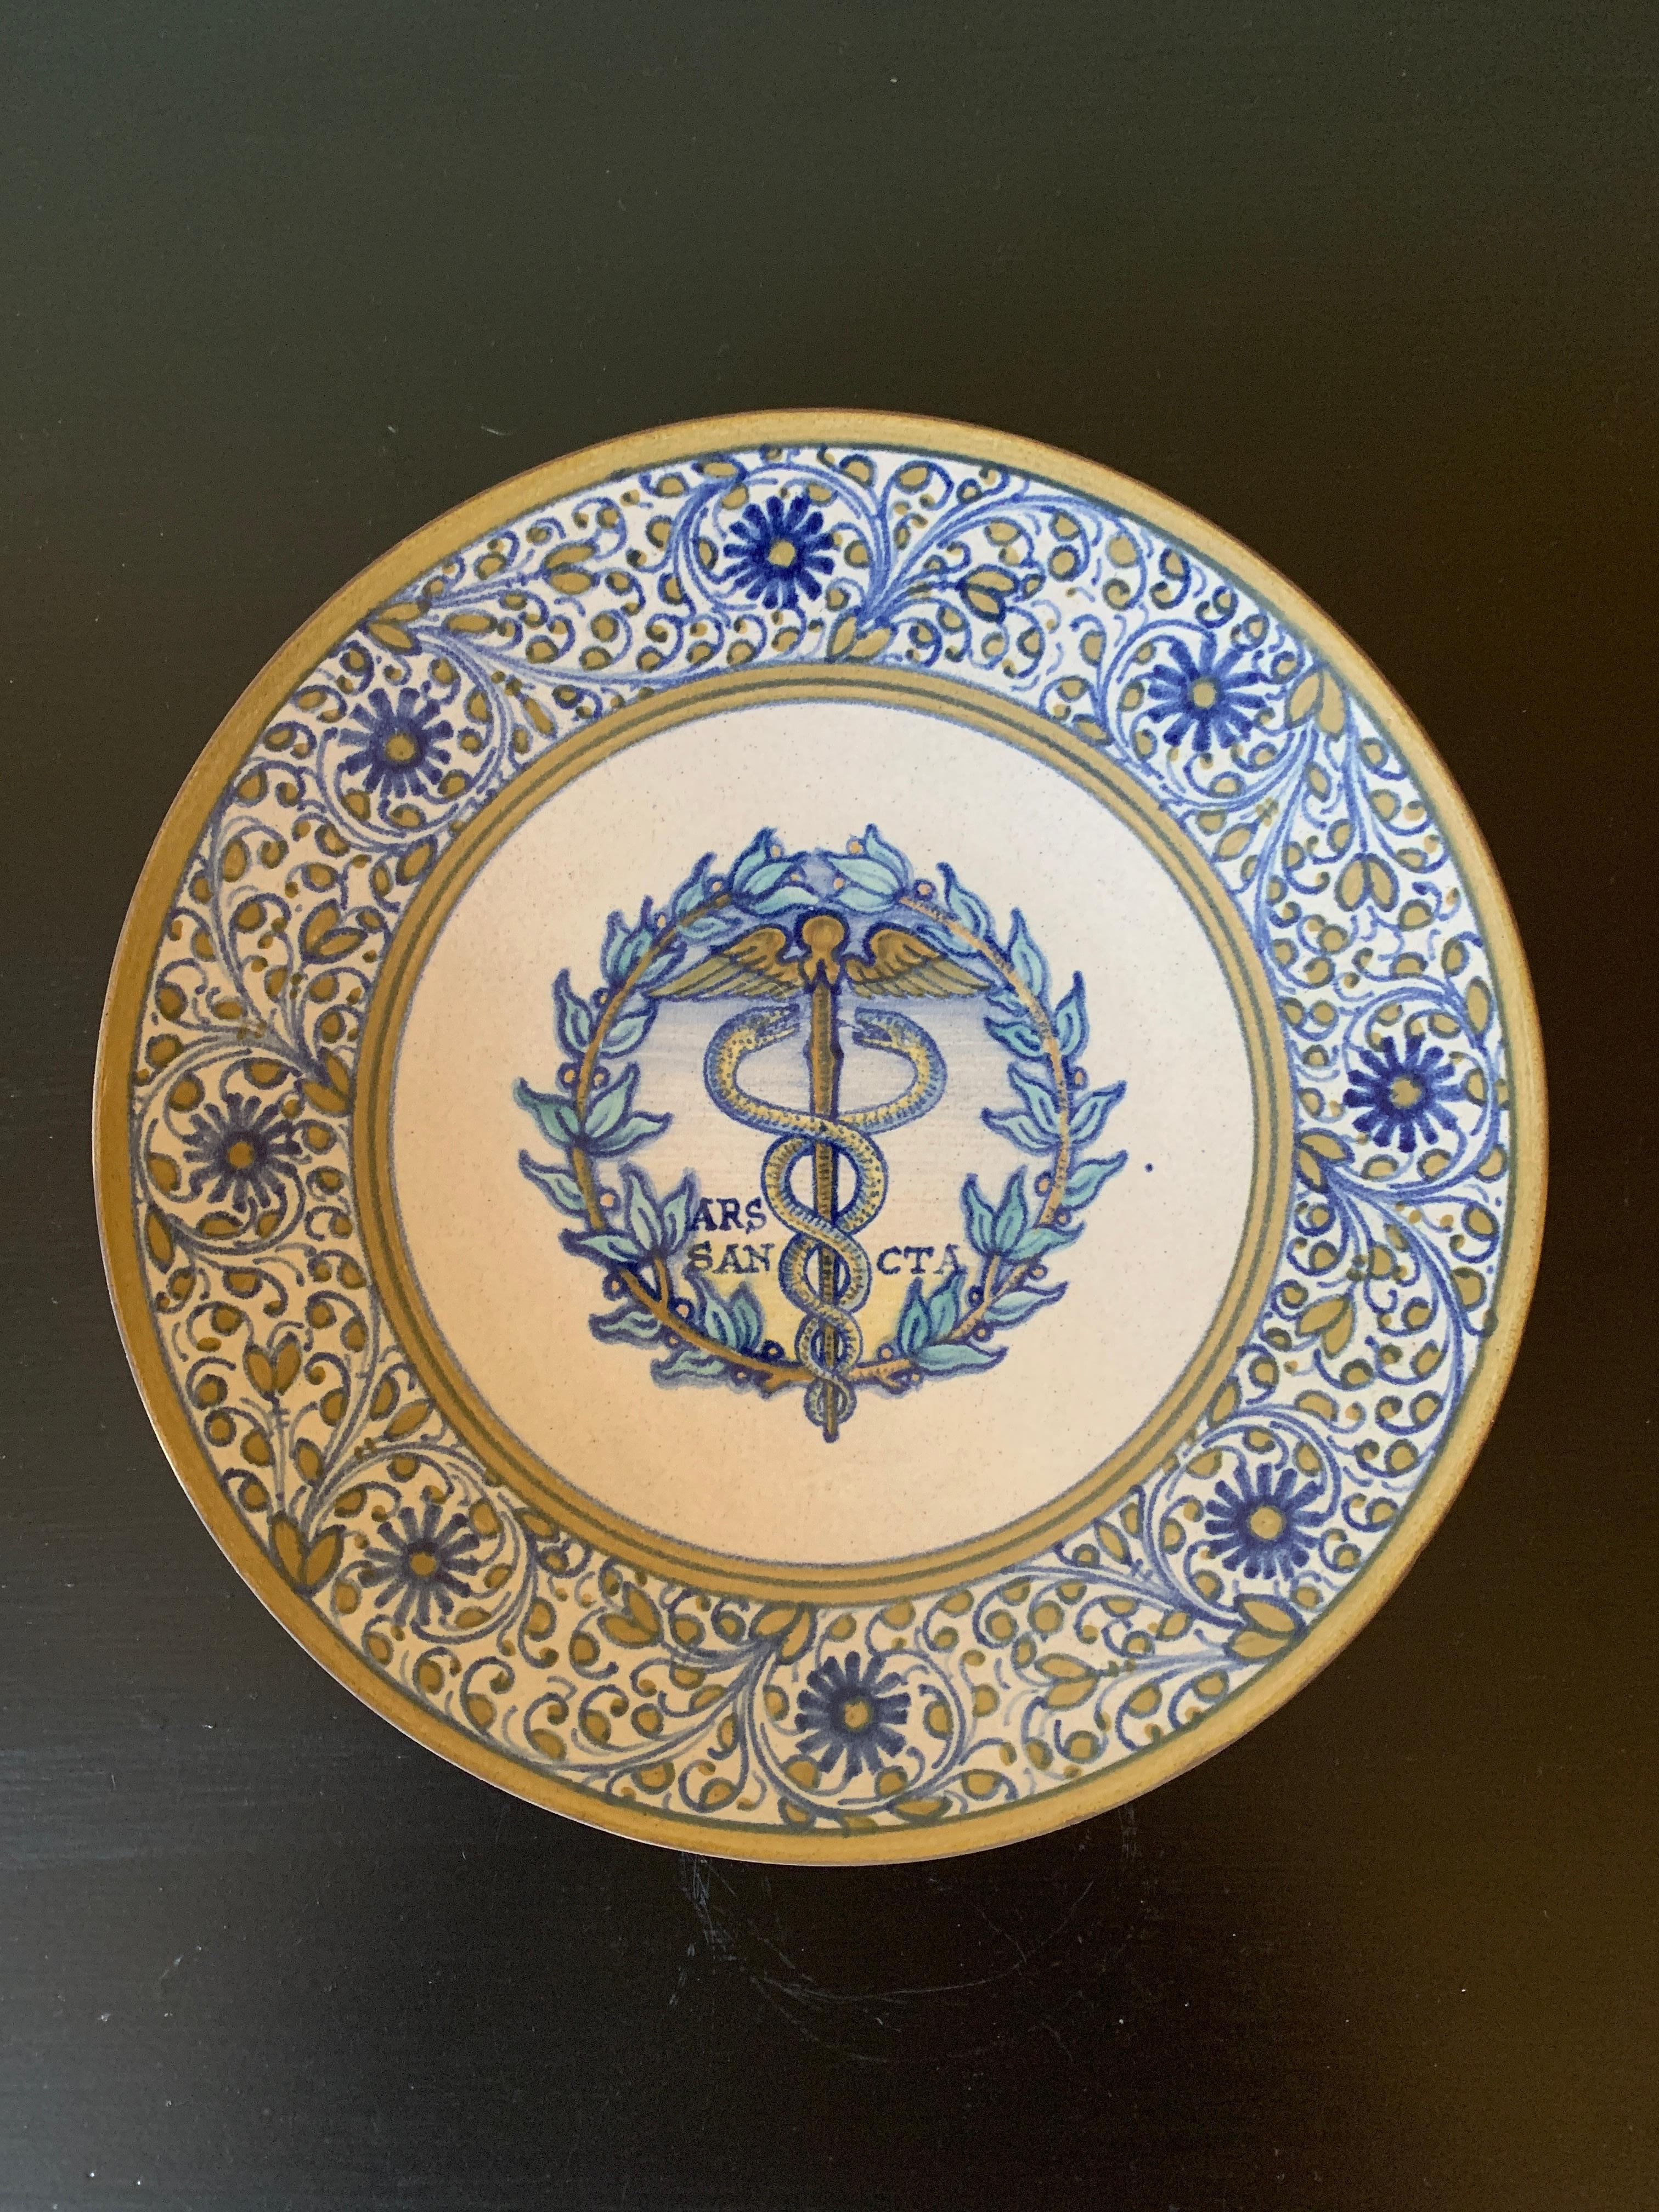 A beautiful hand painted blue, cream, and yellow faience pottery wall plate featuring the caduceus. The caduceus is the staff carried by Hermes in Greek mythology and consequently by Hermes Trismegistus in Greco-Egyptian mythology. The same staff